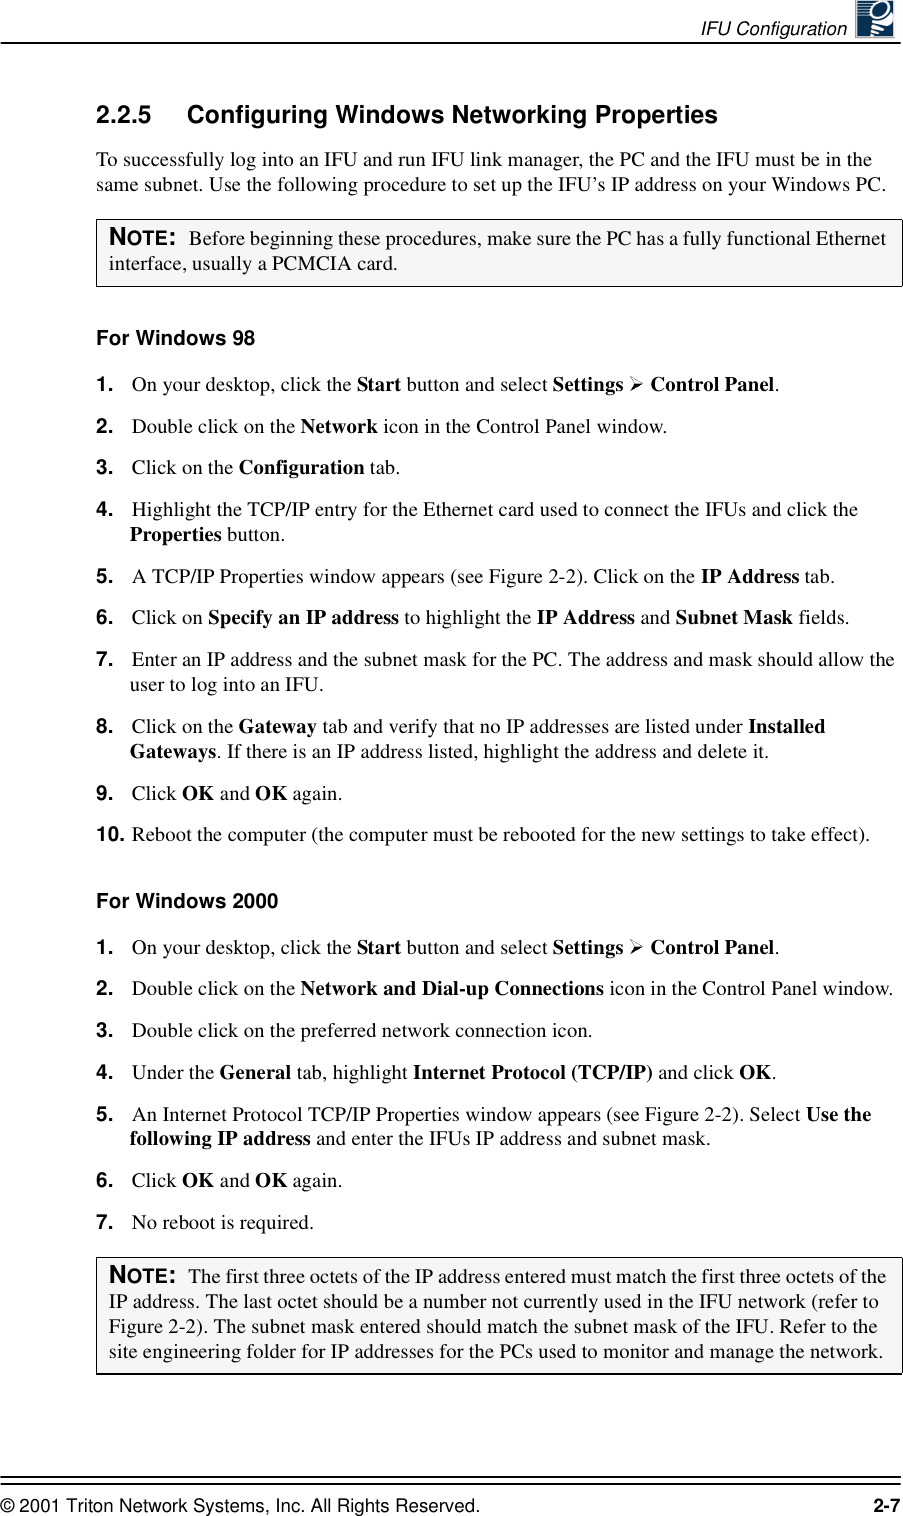 IFU Configuration © 2001 Triton Network Systems, Inc. All Rights Reserved. 2-72.2.5 Configuring Windows Networking PropertiesTo successfully log into an IFU and run IFU link manager, the PC and the IFU must be in the same subnet. Use the following procedure to set up the IFU’s IP address on your Windows PC. For Windows 981. On your desktop, click the Start button and select Settings   Control Panel. 2. Double click on the Network icon in the Control Panel window.3. Click on the Configuration tab. 4. Highlight the TCP/IP entry for the Ethernet card used to connect the IFUs and click the Properties button.5. A TCP/IP Properties window appears (see Figure 2-2). Click on the IP Address tab.6. Click on Specify an IP address to highlight the IP Address and Subnet Mask fields.7. Enter an IP address and the subnet mask for the PC. The address and mask should allow the user to log into an IFU.8. Click on the Gateway tab and verify that no IP addresses are listed under Installed Gateways. If there is an IP address listed, highlight the address and delete it.9. Click OK and OK again. 10. Reboot the computer (the computer must be rebooted for the new settings to take effect).For Windows 20001. On your desktop, click the Start button and select Settings   Control Panel. 2. Double click on the Network and Dial-up Connections icon in the Control Panel window.3. Double click on the preferred network connection icon.4. Under the General tab, highlight Internet Protocol (TCP/IP) and click OK.5. An Internet Protocol TCP/IP Properties window appears (see Figure 2-2). Select Use the following IP address and enter the IFUs IP address and subnet mask. 6. Click OK and OK again. 7. No reboot is required. NOTE:  Before beginning these procedures, make sure the PC has a fully functional Ethernet interface, usually a PCMCIA card.NOTE:  The first three octets of the IP address entered must match the first three octets of the IP address. The last octet should be a number not currently used in the IFU network (refer to Figure 2-2). The subnet mask entered should match the subnet mask of the IFU. Refer to the site engineering folder for IP addresses for the PCs used to monitor and manage the network.